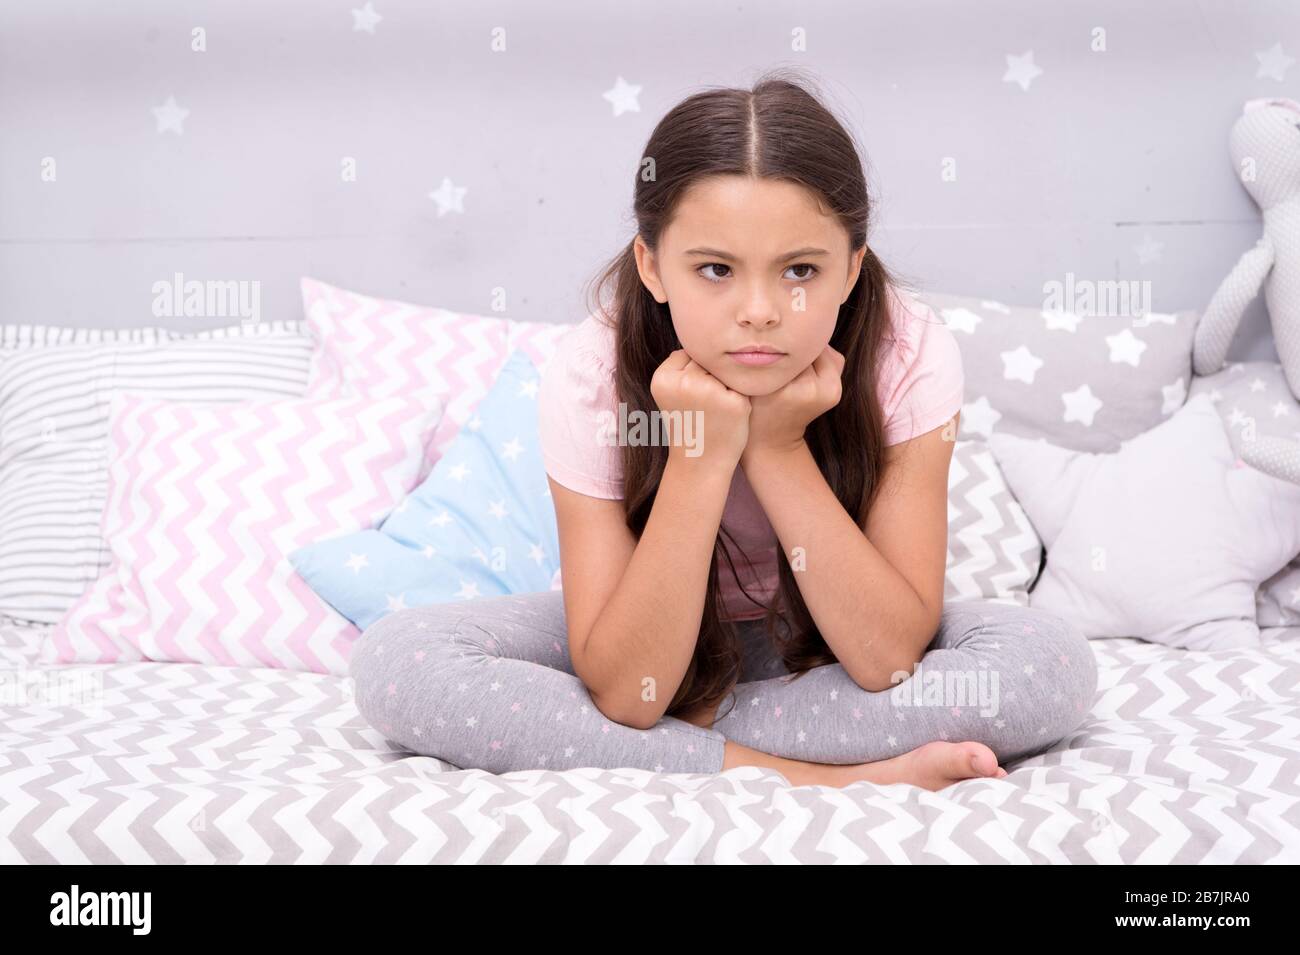 Unhappy cutie. Unhappy baby sit in bed. Little child with unhappy look. Bedtime routine. Daytime nap. Kids health. Childcare. Early morning. Good night. I cant sleep when Im unhappy. Stock Photo